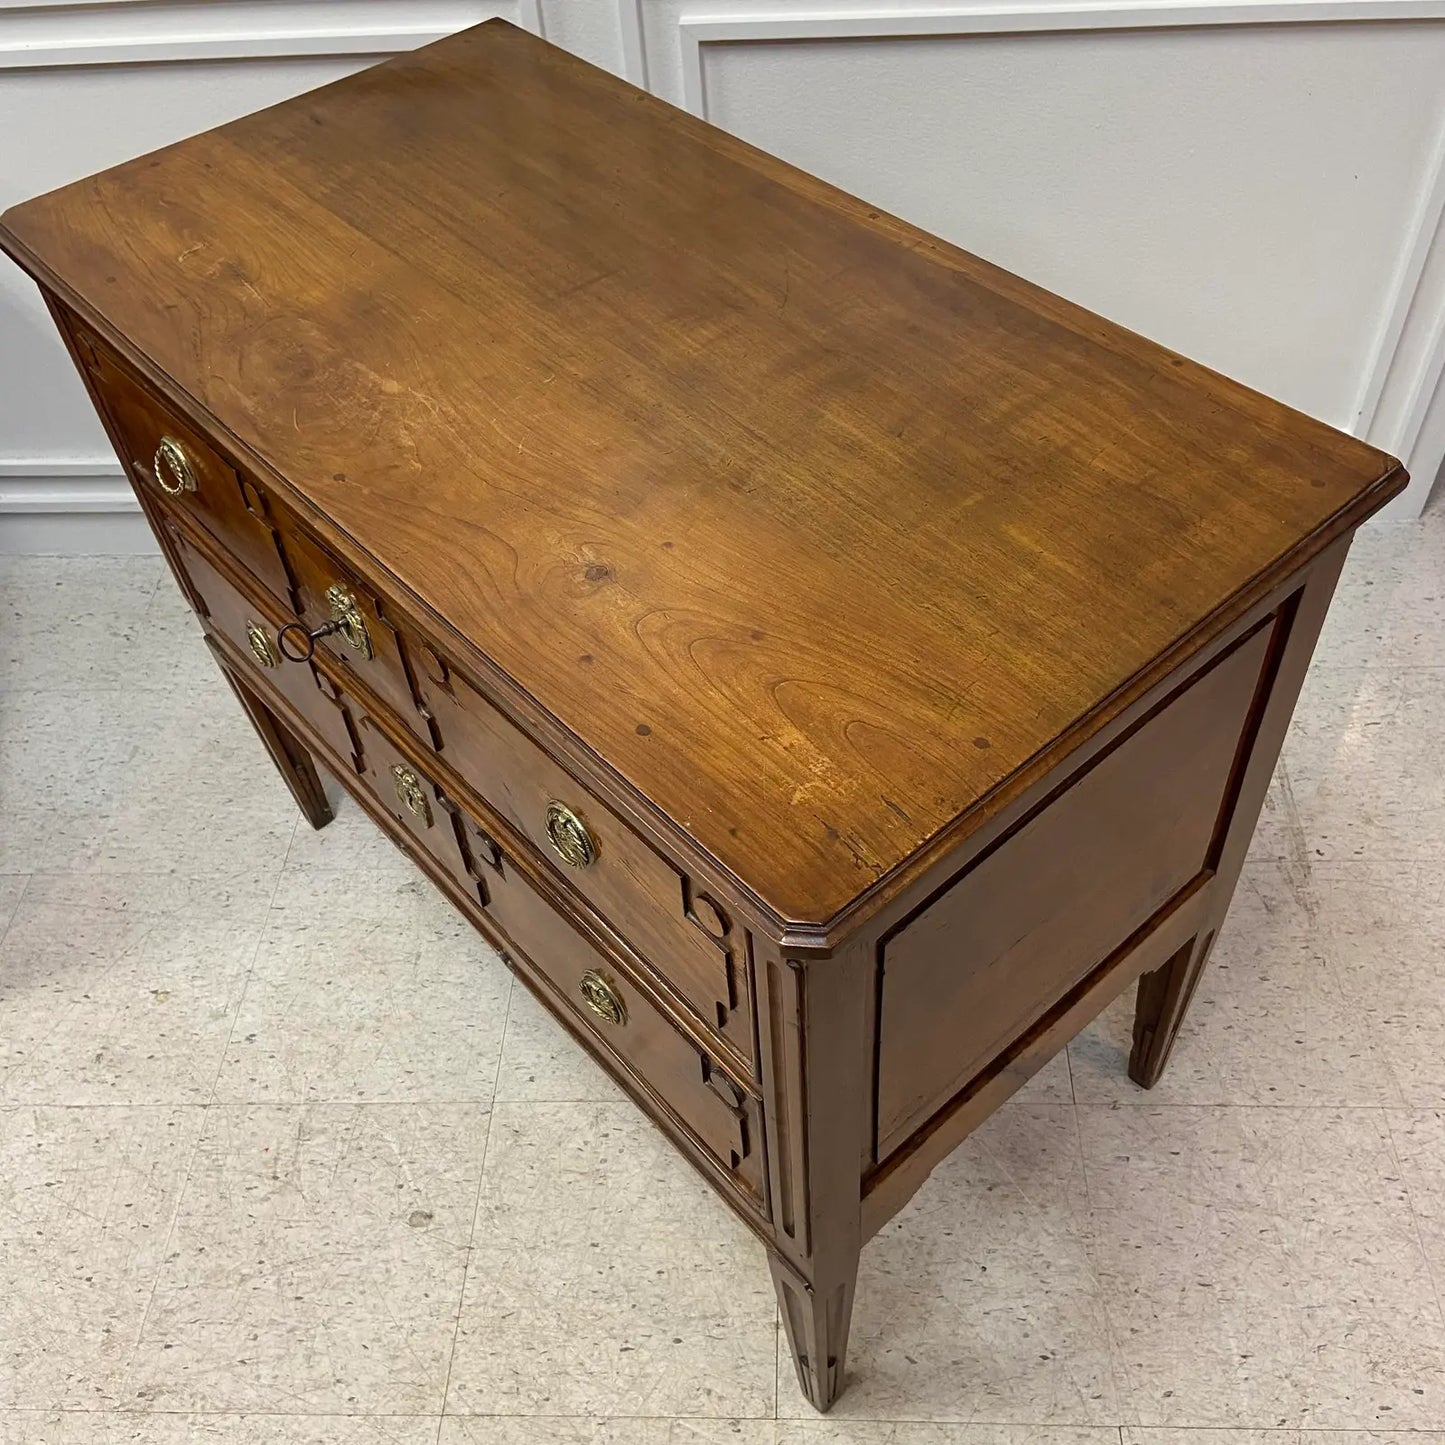 1780 FRENCH CHERRY WOOD COMMODE SAUTEUSE WITH LOCK